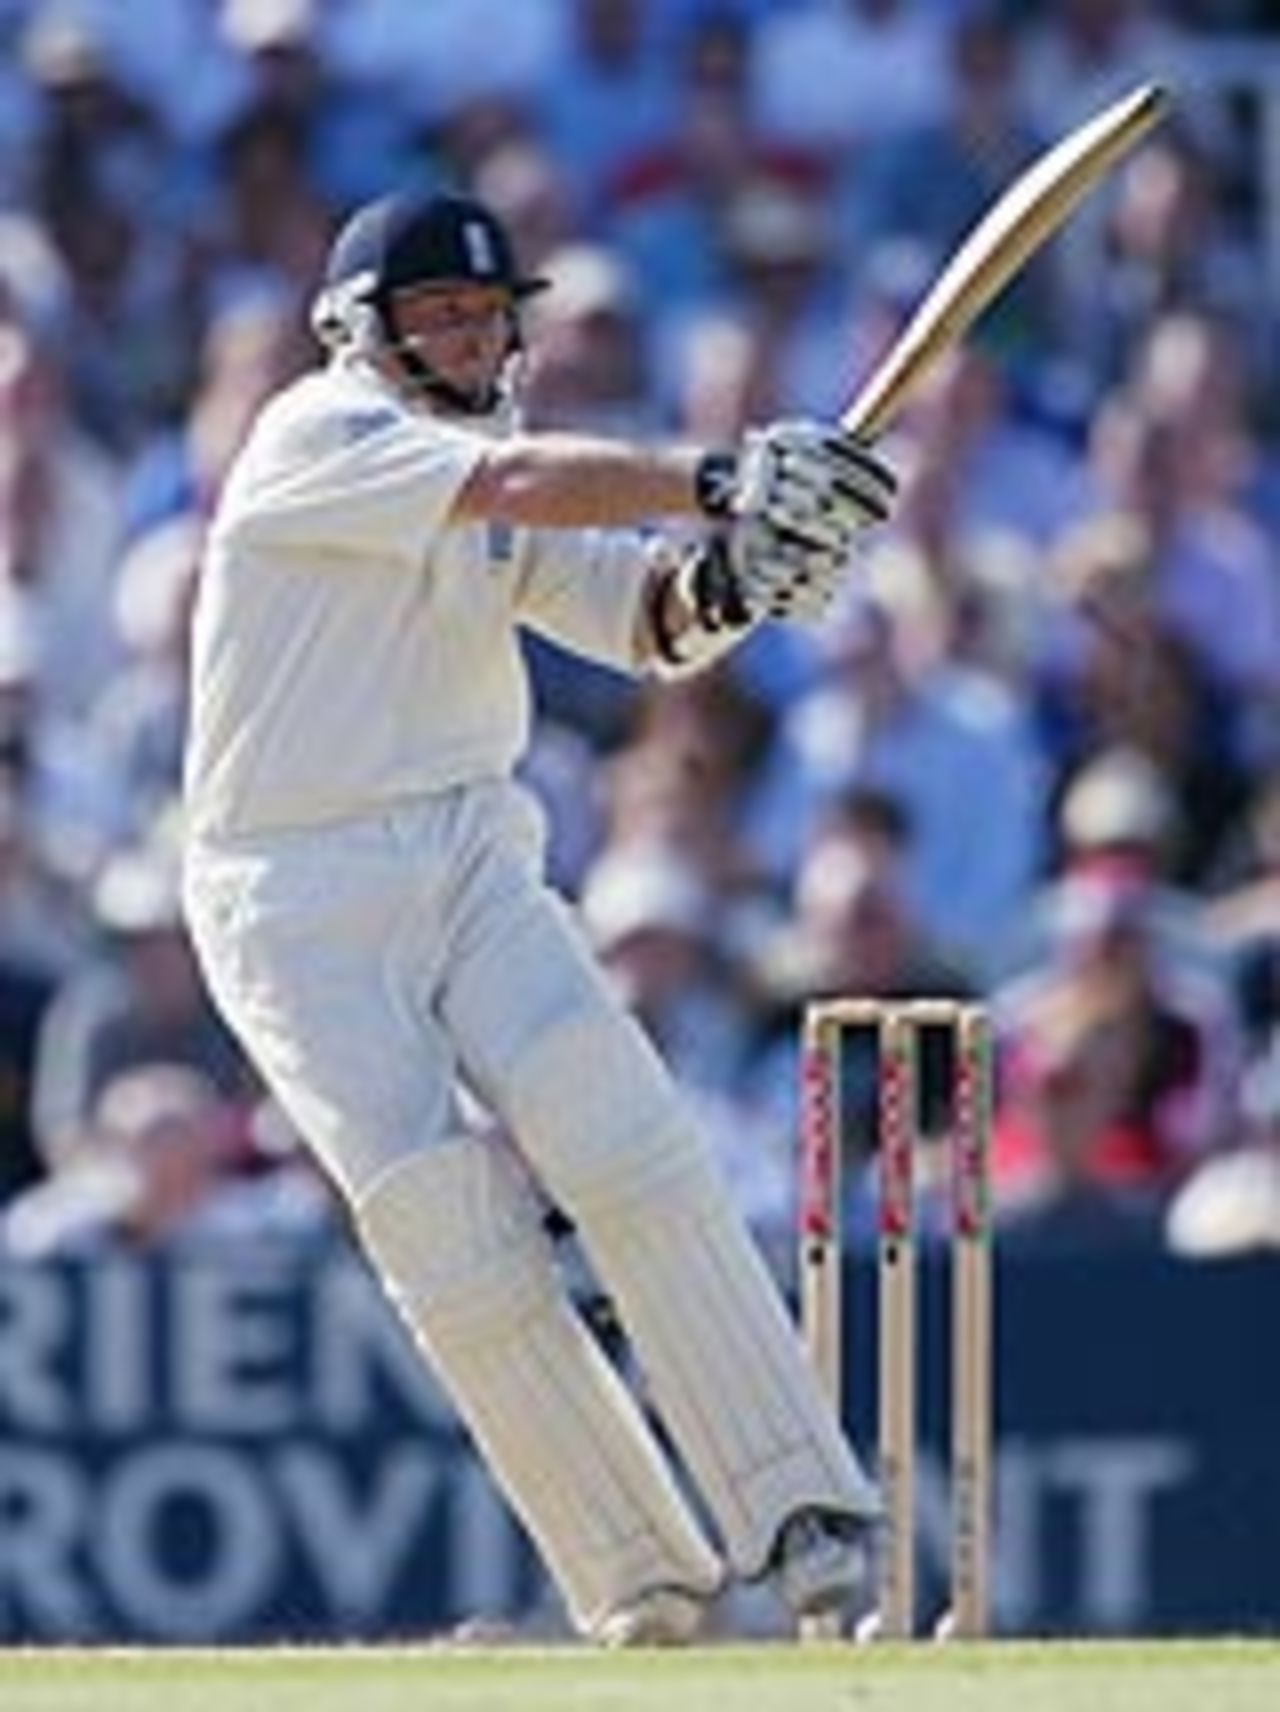 Ian Bell pulls another four, as he marks his Test debut with an impressive 70 in the fourth Test at The Oval, England v West Indies, 4th Test, August 19, 2004